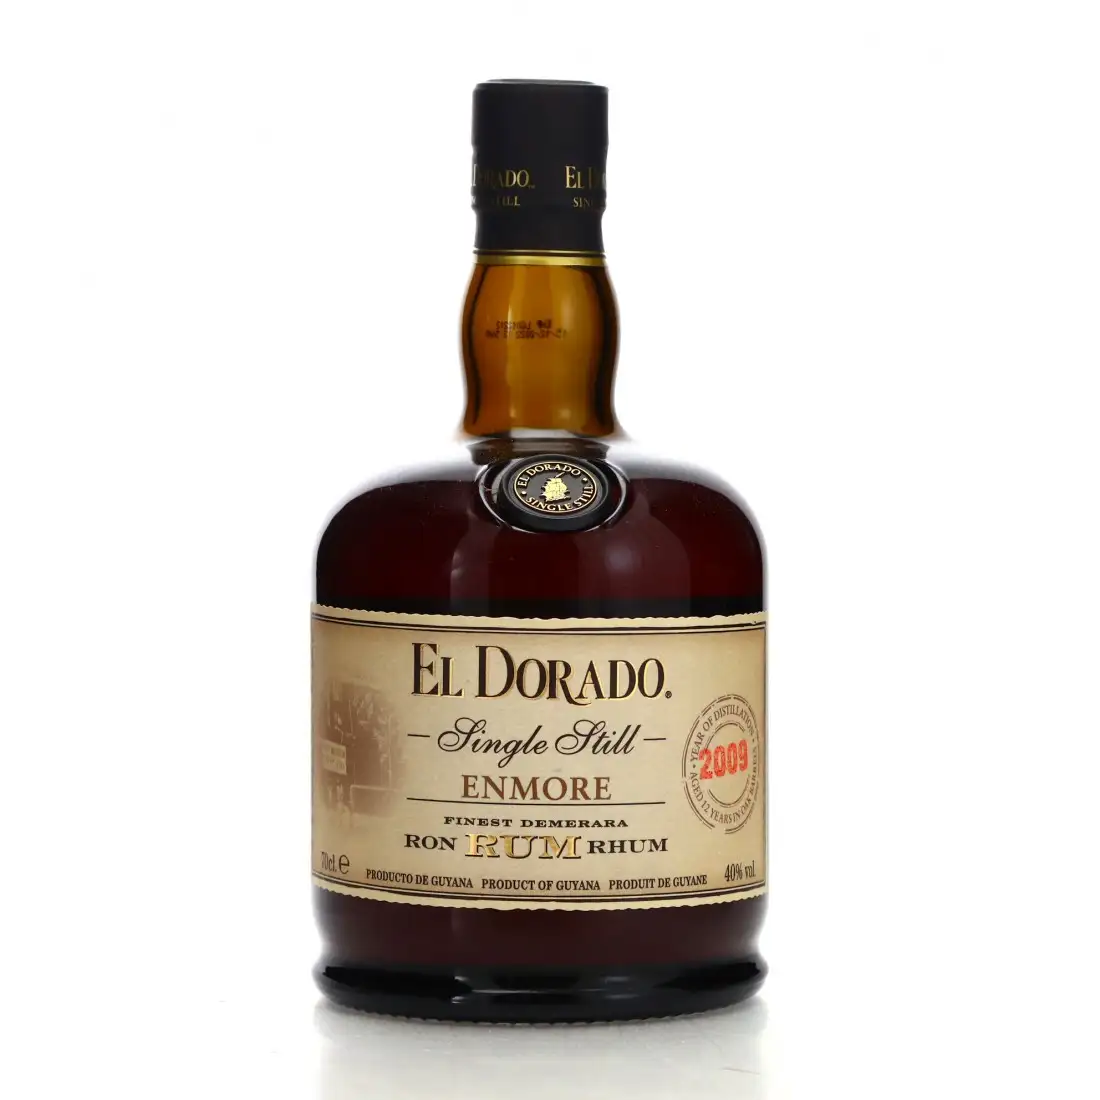 Image of the front of the bottle of the rum El Dorado Cask Strength Single Still Enmore EHP